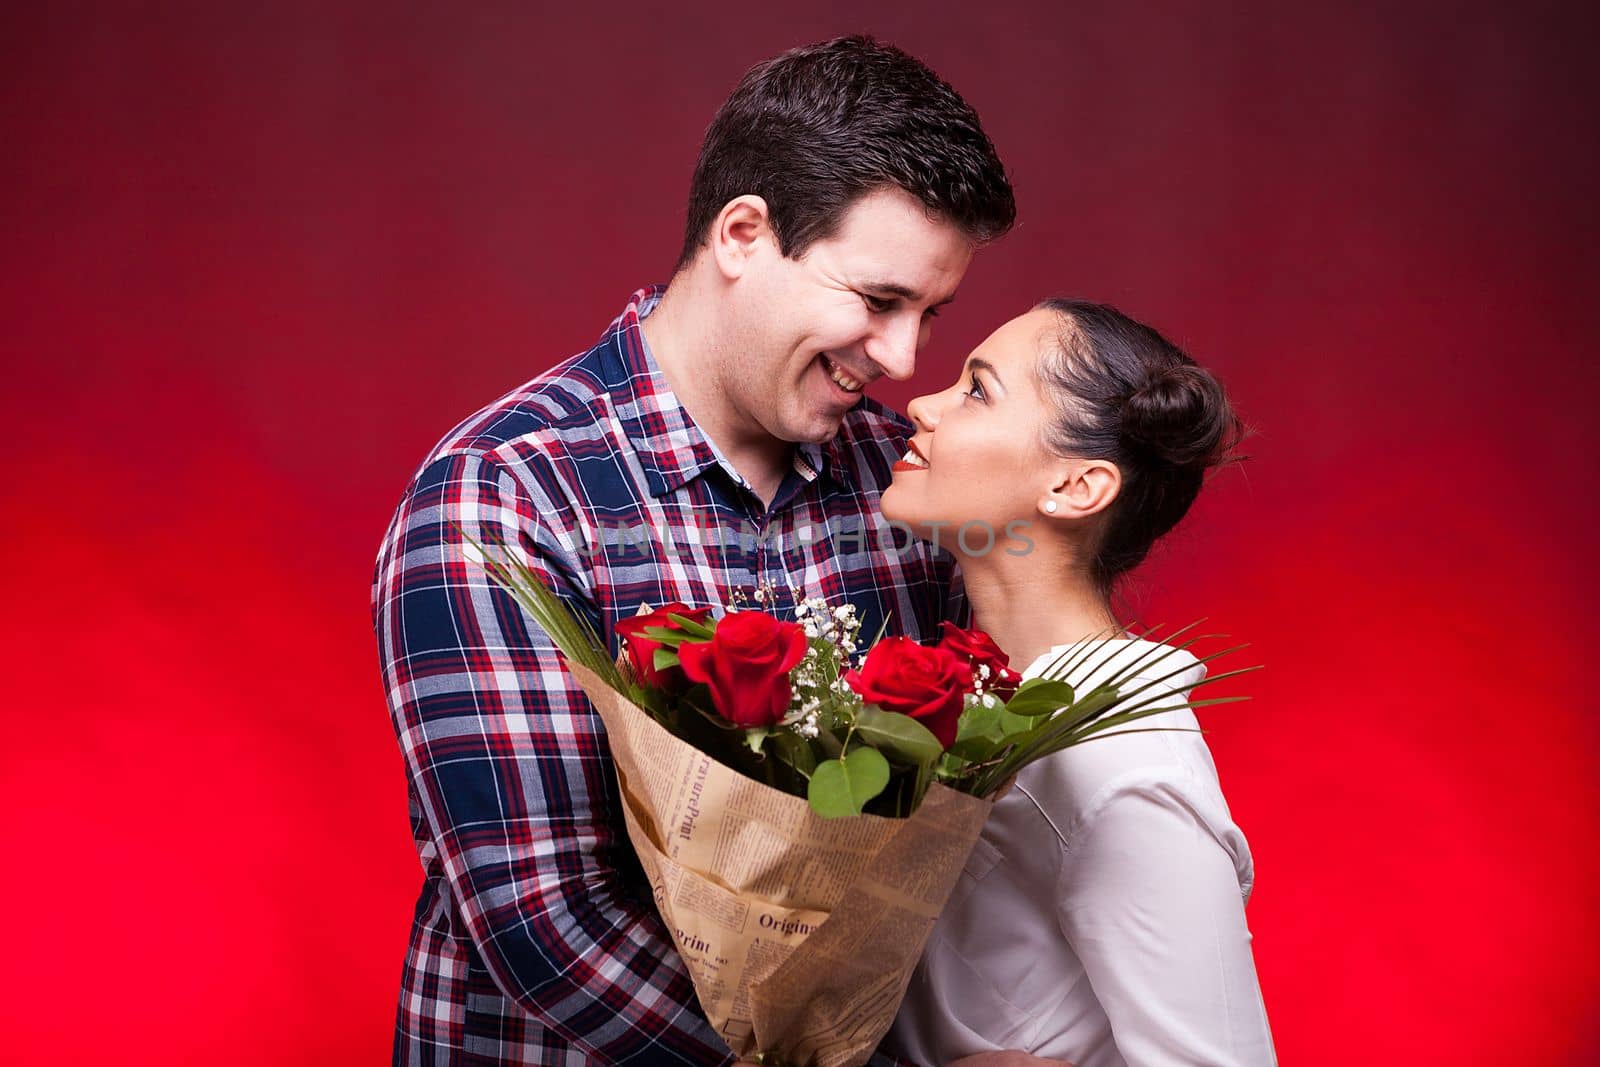 Couple on a date while woman holds flowers in hands by DCStudio